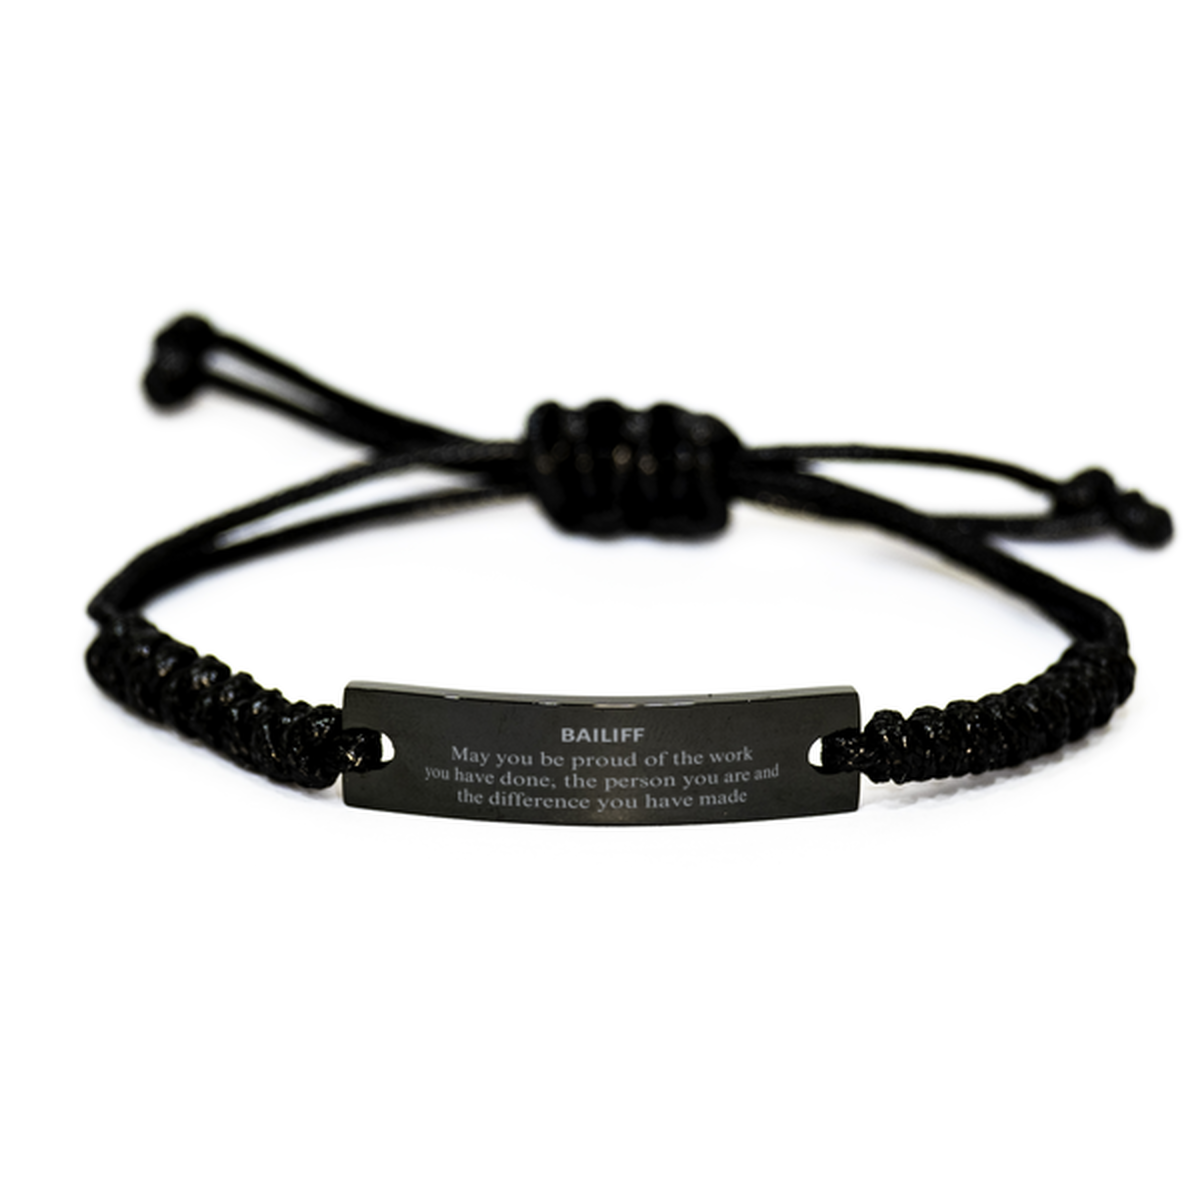 Bailiff May you be proud of the work you have done, Retirement Bailiff Black Rope Bracelet for Colleague Appreciation Gifts Amazing for Bailiff